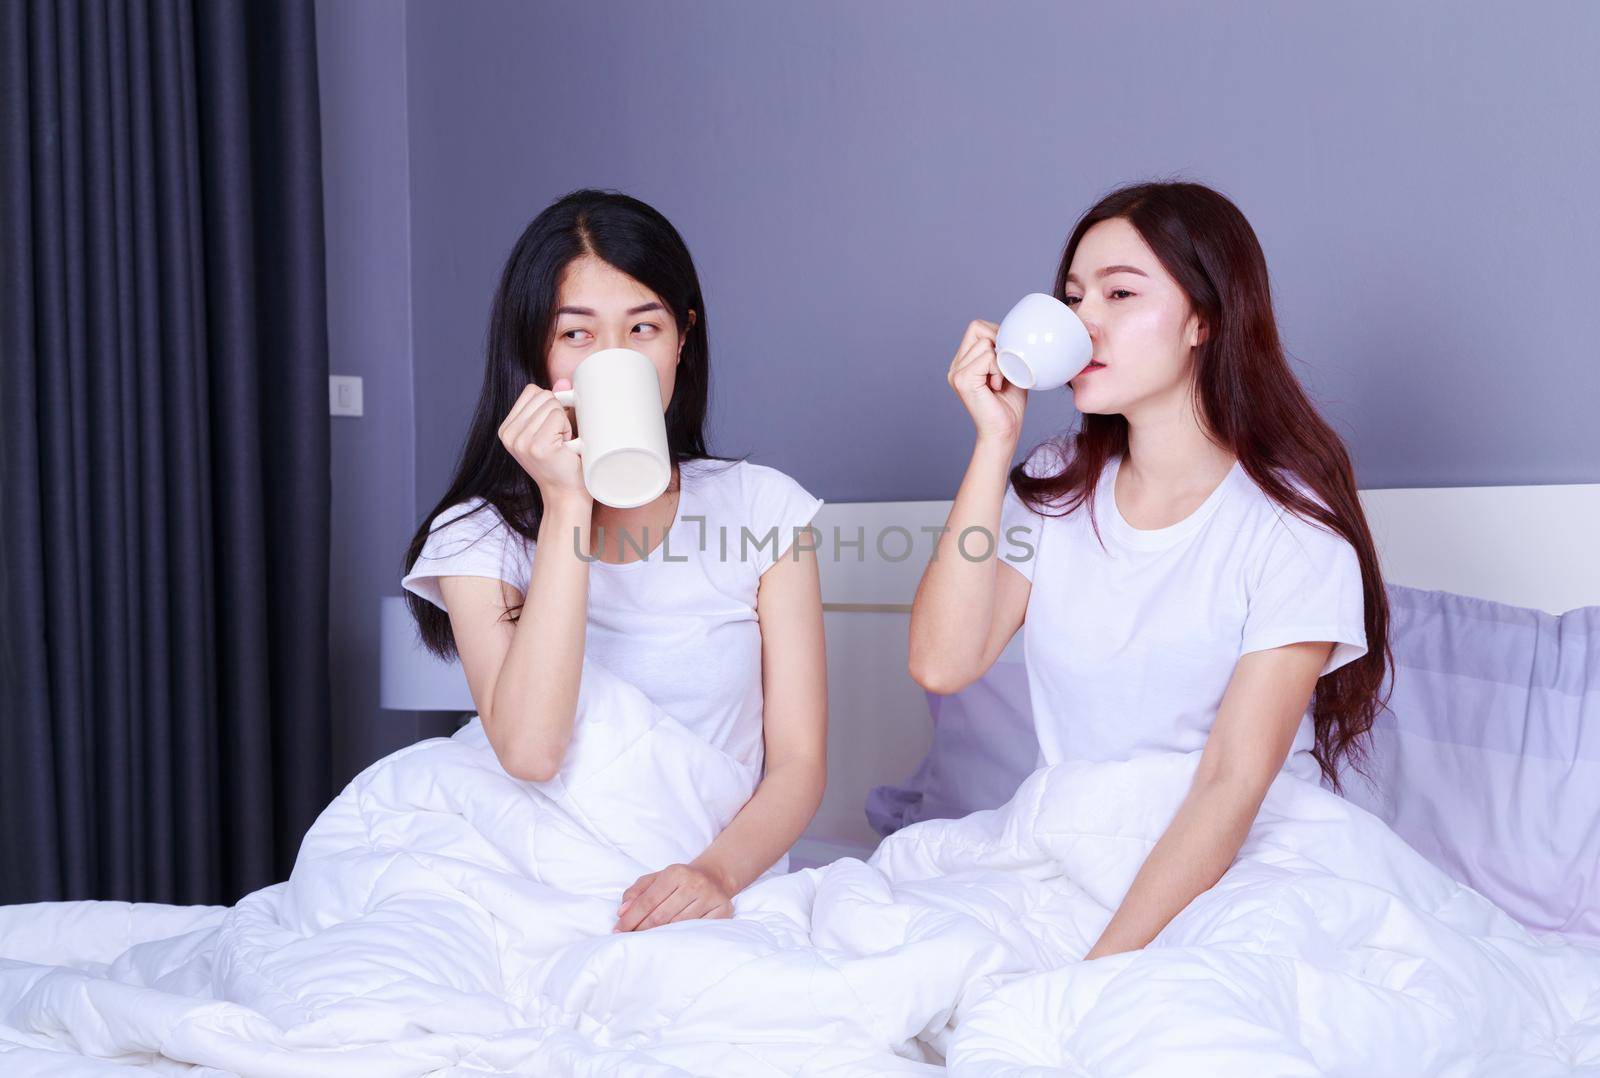 two best friends talking and drinking a cup of coffee on bed in the bedroom 